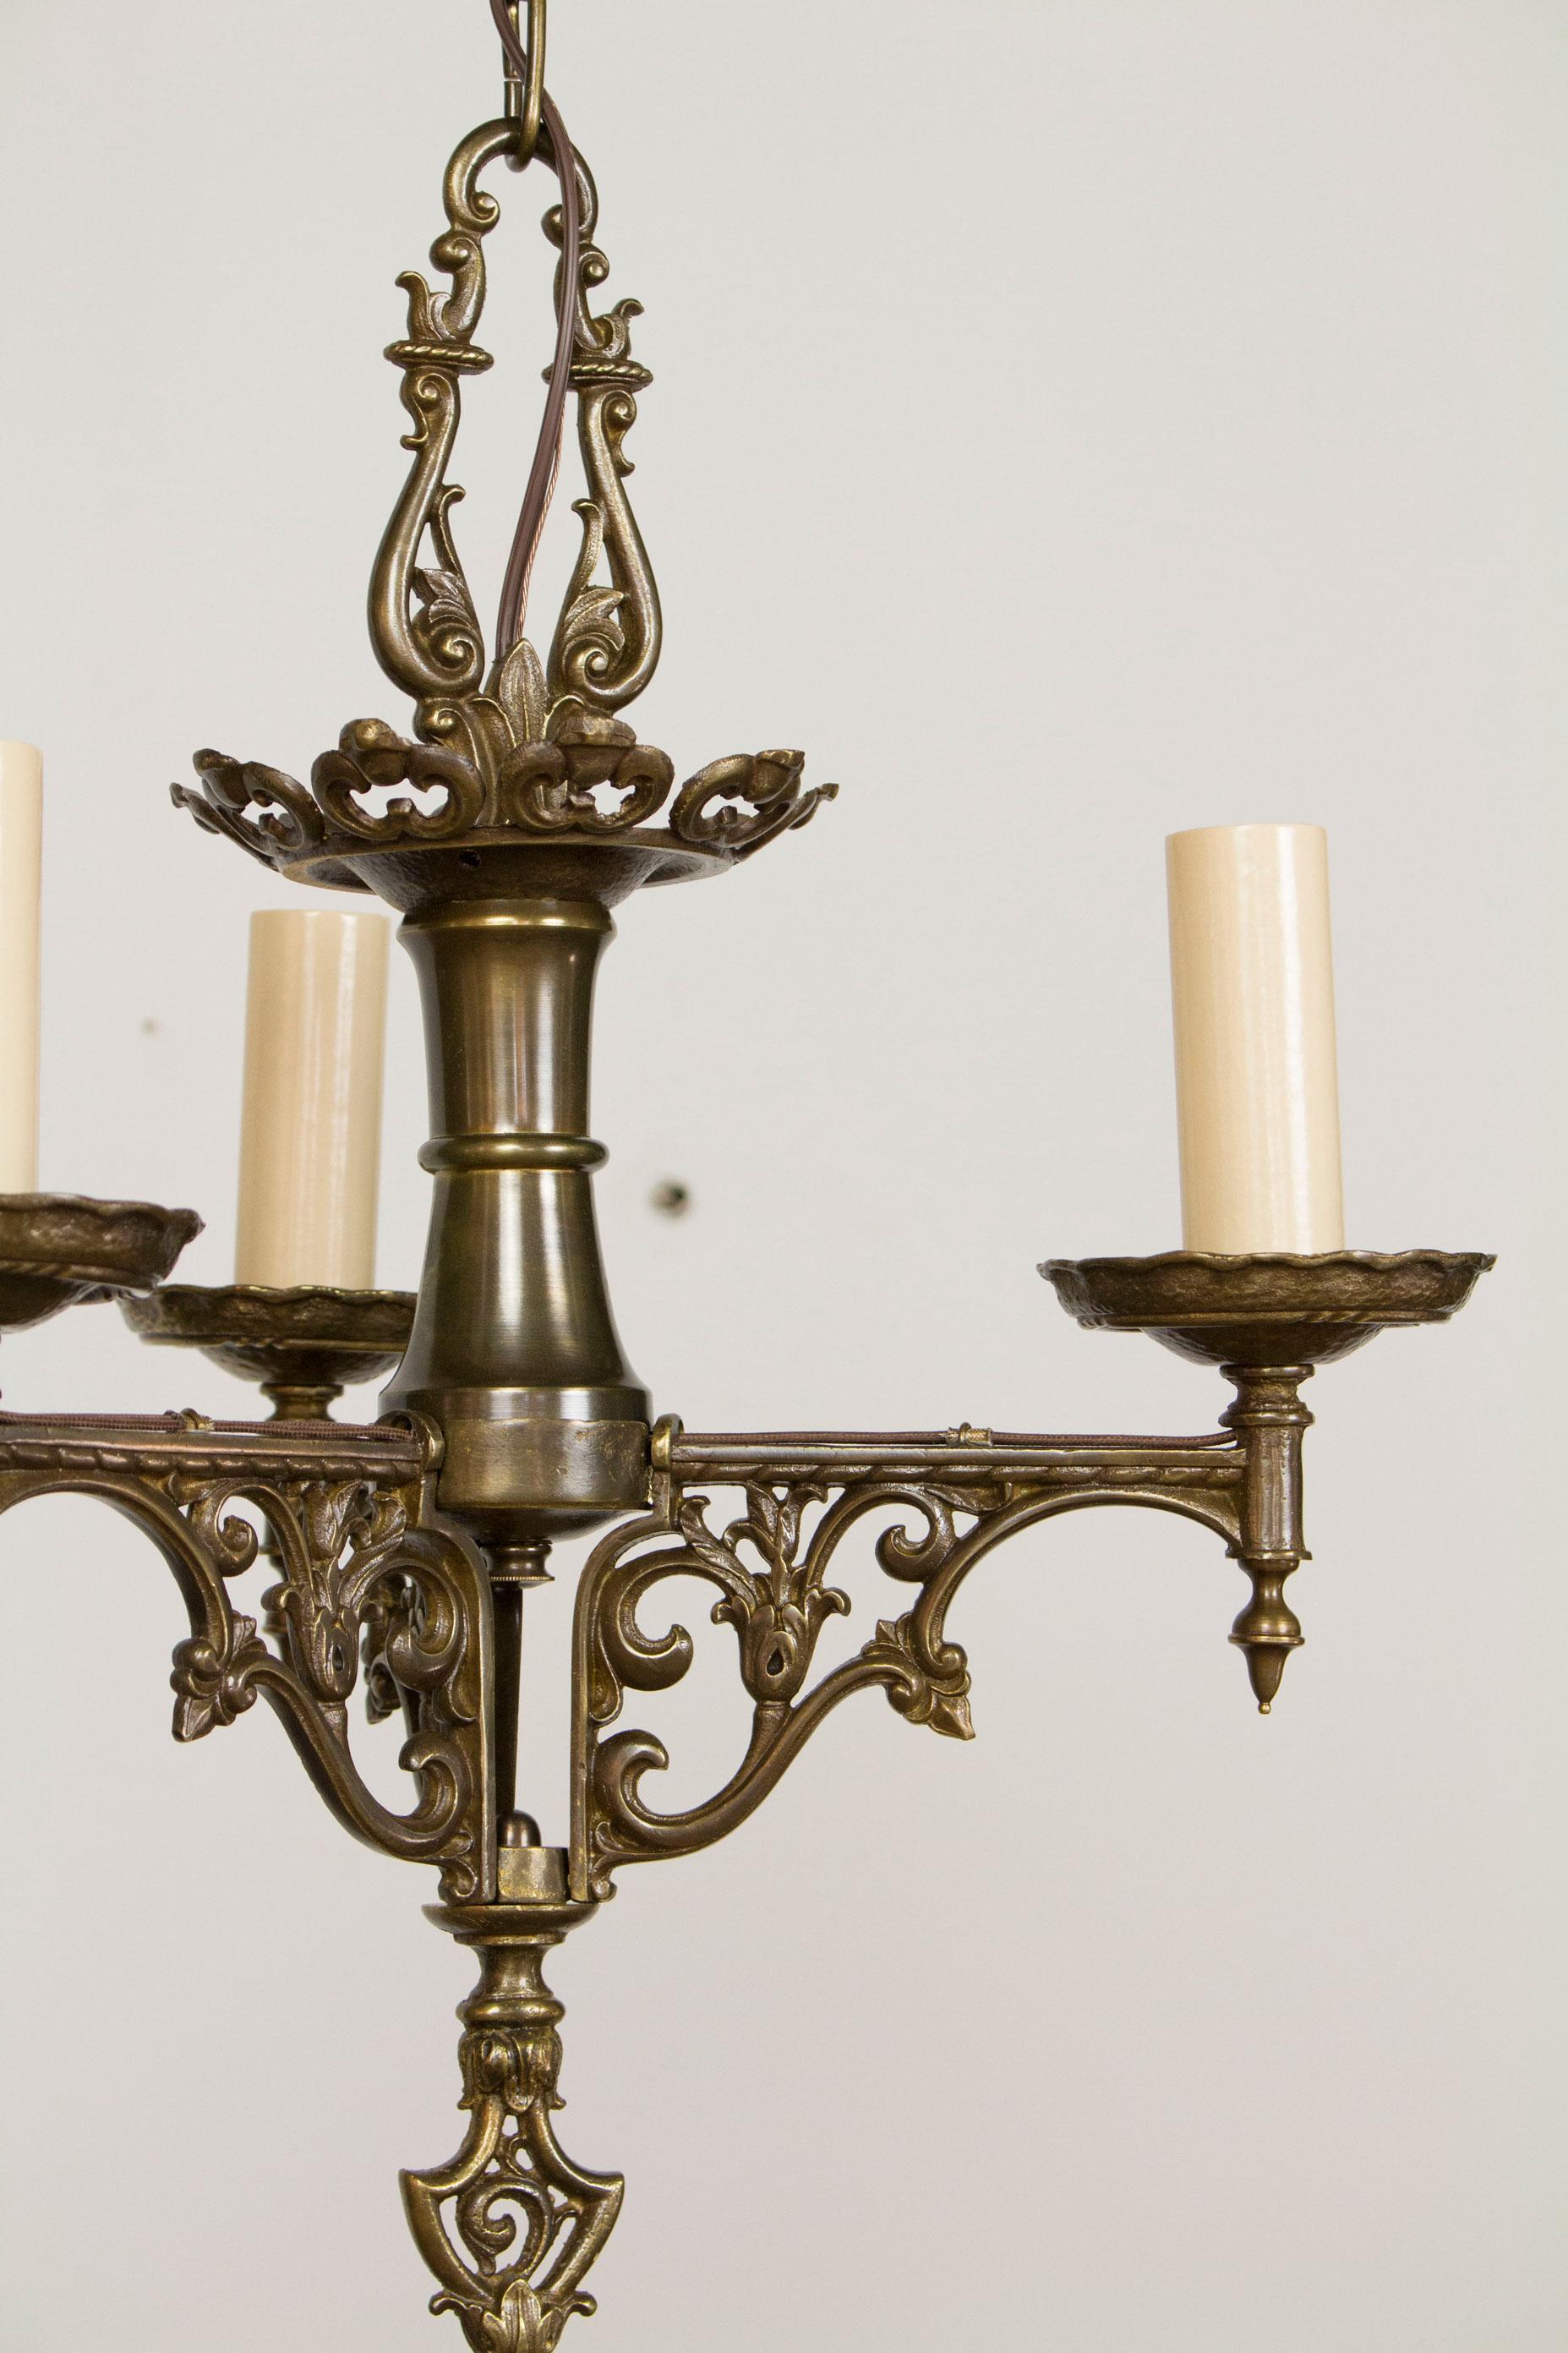 Three Arm Spanish Revival Chandelier. Solid Brass with dark patina finish. Completely Restored and rewired.  Matching Five Arm Spanish Revival Chandelier is also available, C348

Dimensions:  Dimensions: Diameter: 15